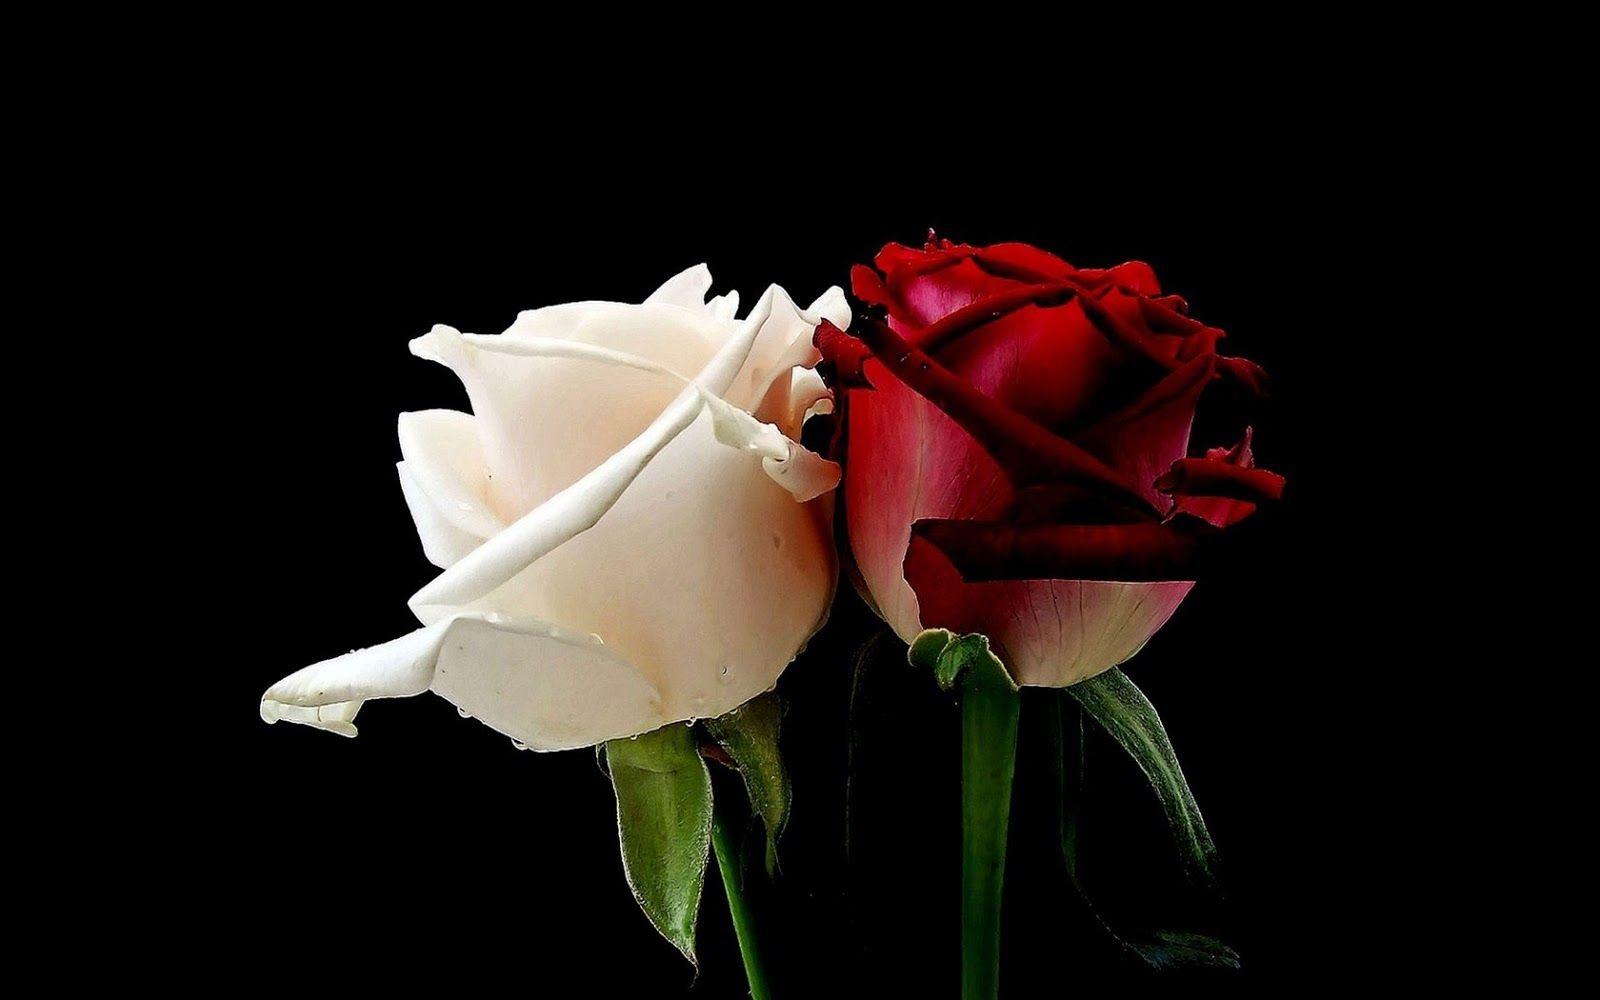 Black And Red Roses Wallpapers Wallpaper Cave